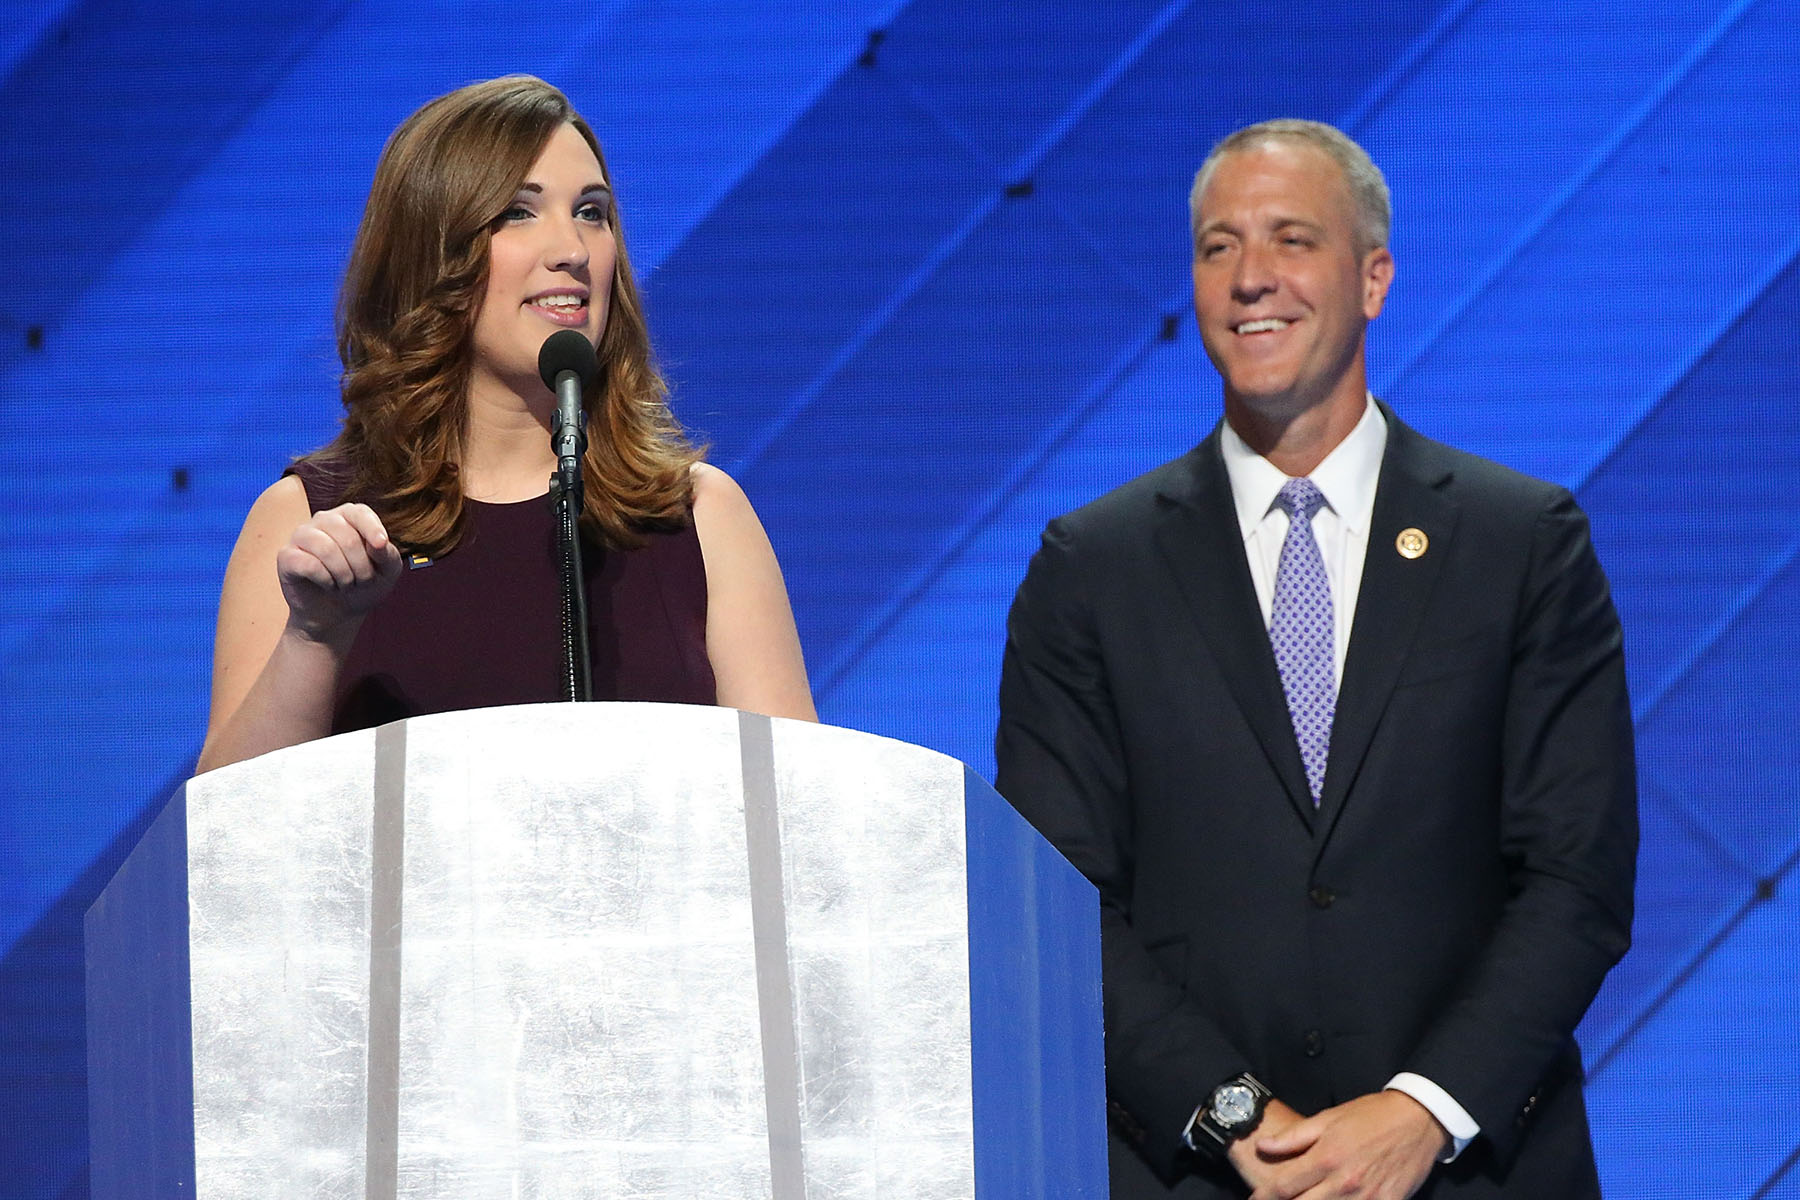 Sarah McBride delivers remarks as co-chair of the congressional LGBTQ+ equality caucus at the Democratic National Convention.